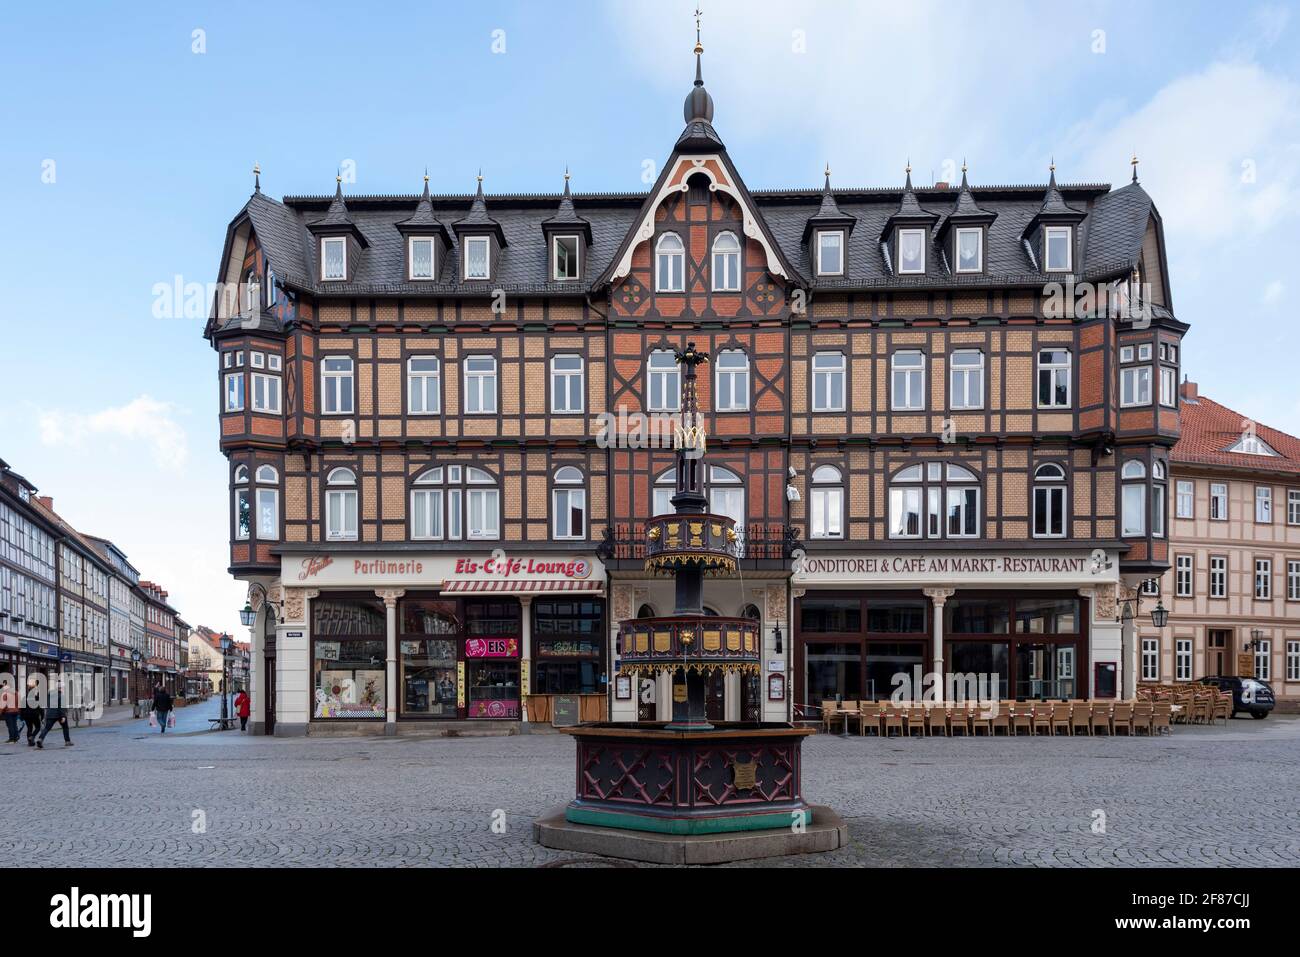 Wernigerode, Germany. 05th Apr, 2021. The richly decorated neo-Gothic  benefactor fountain stands on Wernigerode's market square, with historic  half-timbered houses behind it. Credit: Stephan  Schulz/dpa-Zentralbild/ZB/dpa/Alamy Live News Stock Photo - Alamy